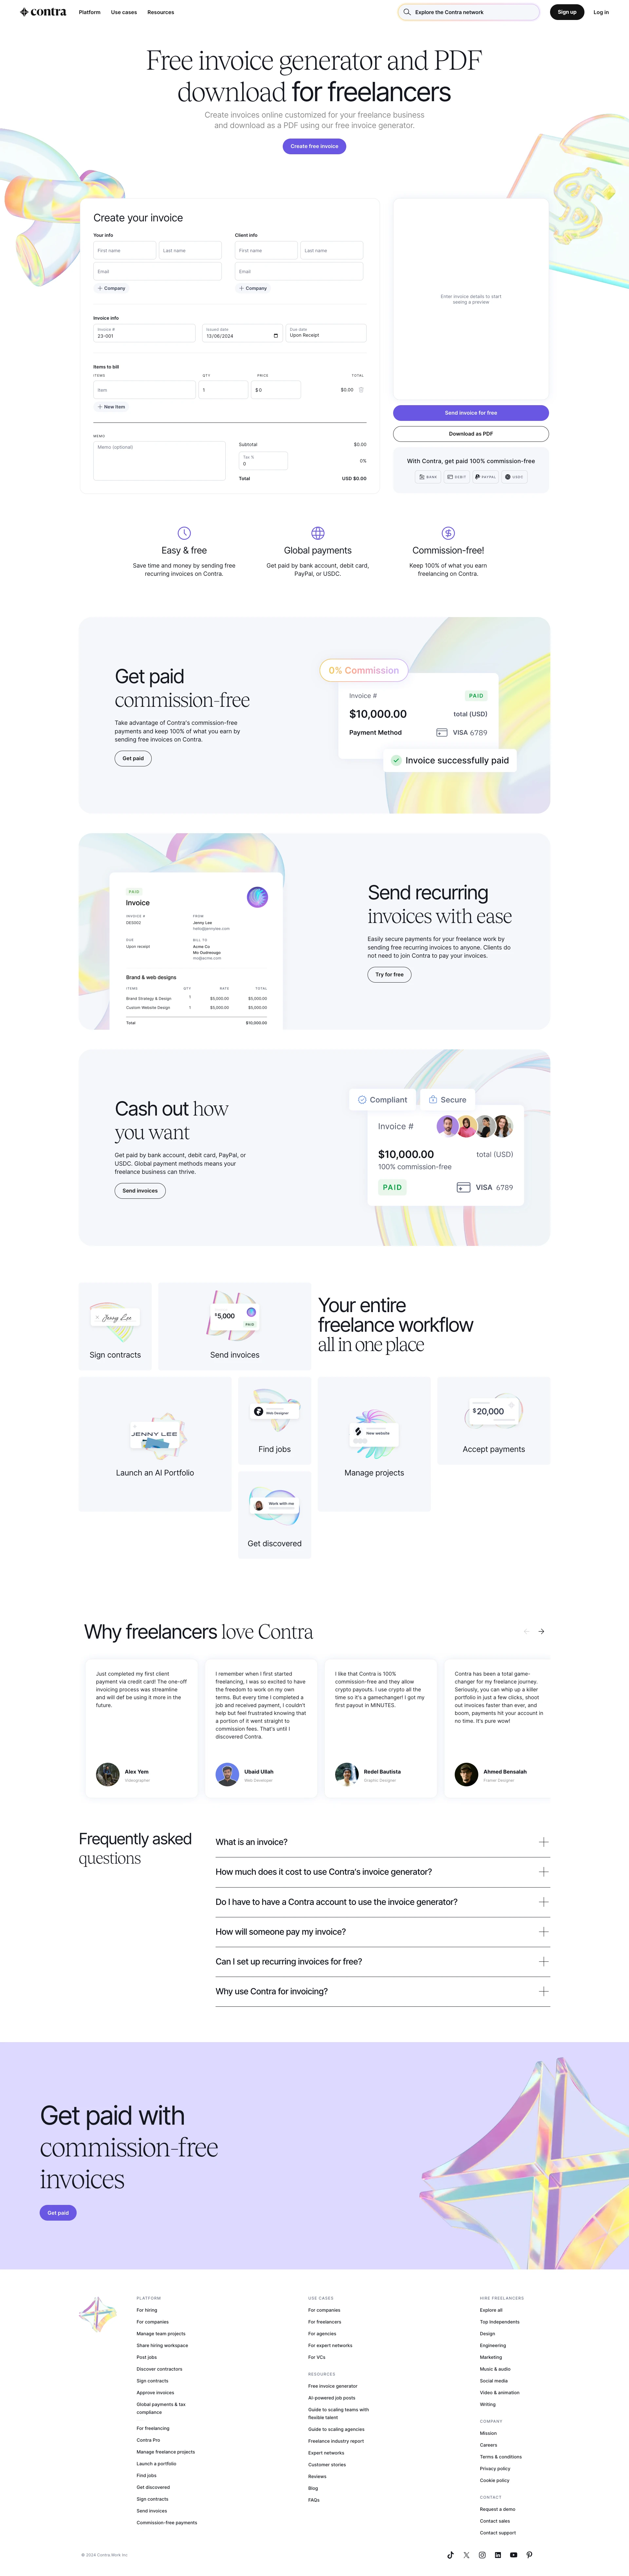 Contra Landing Page Example: The commission-free freelance platform. A new way to work. Build, manage and grow your flexible workforce — all in one place.